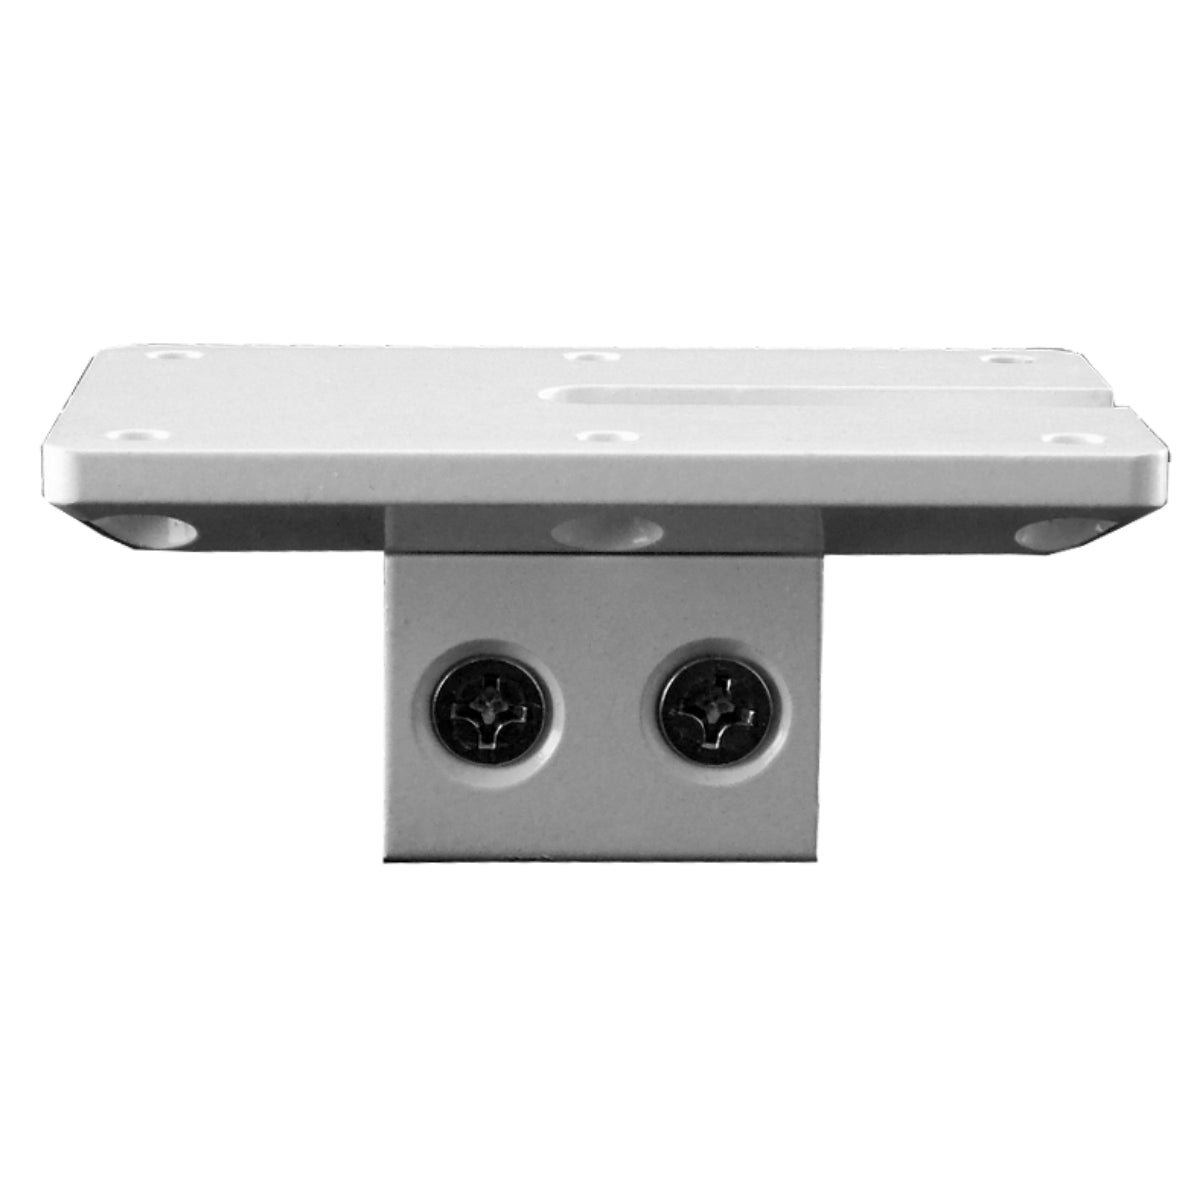 RPM Flat Mount Bracket For Surface/Deck Mount (White)